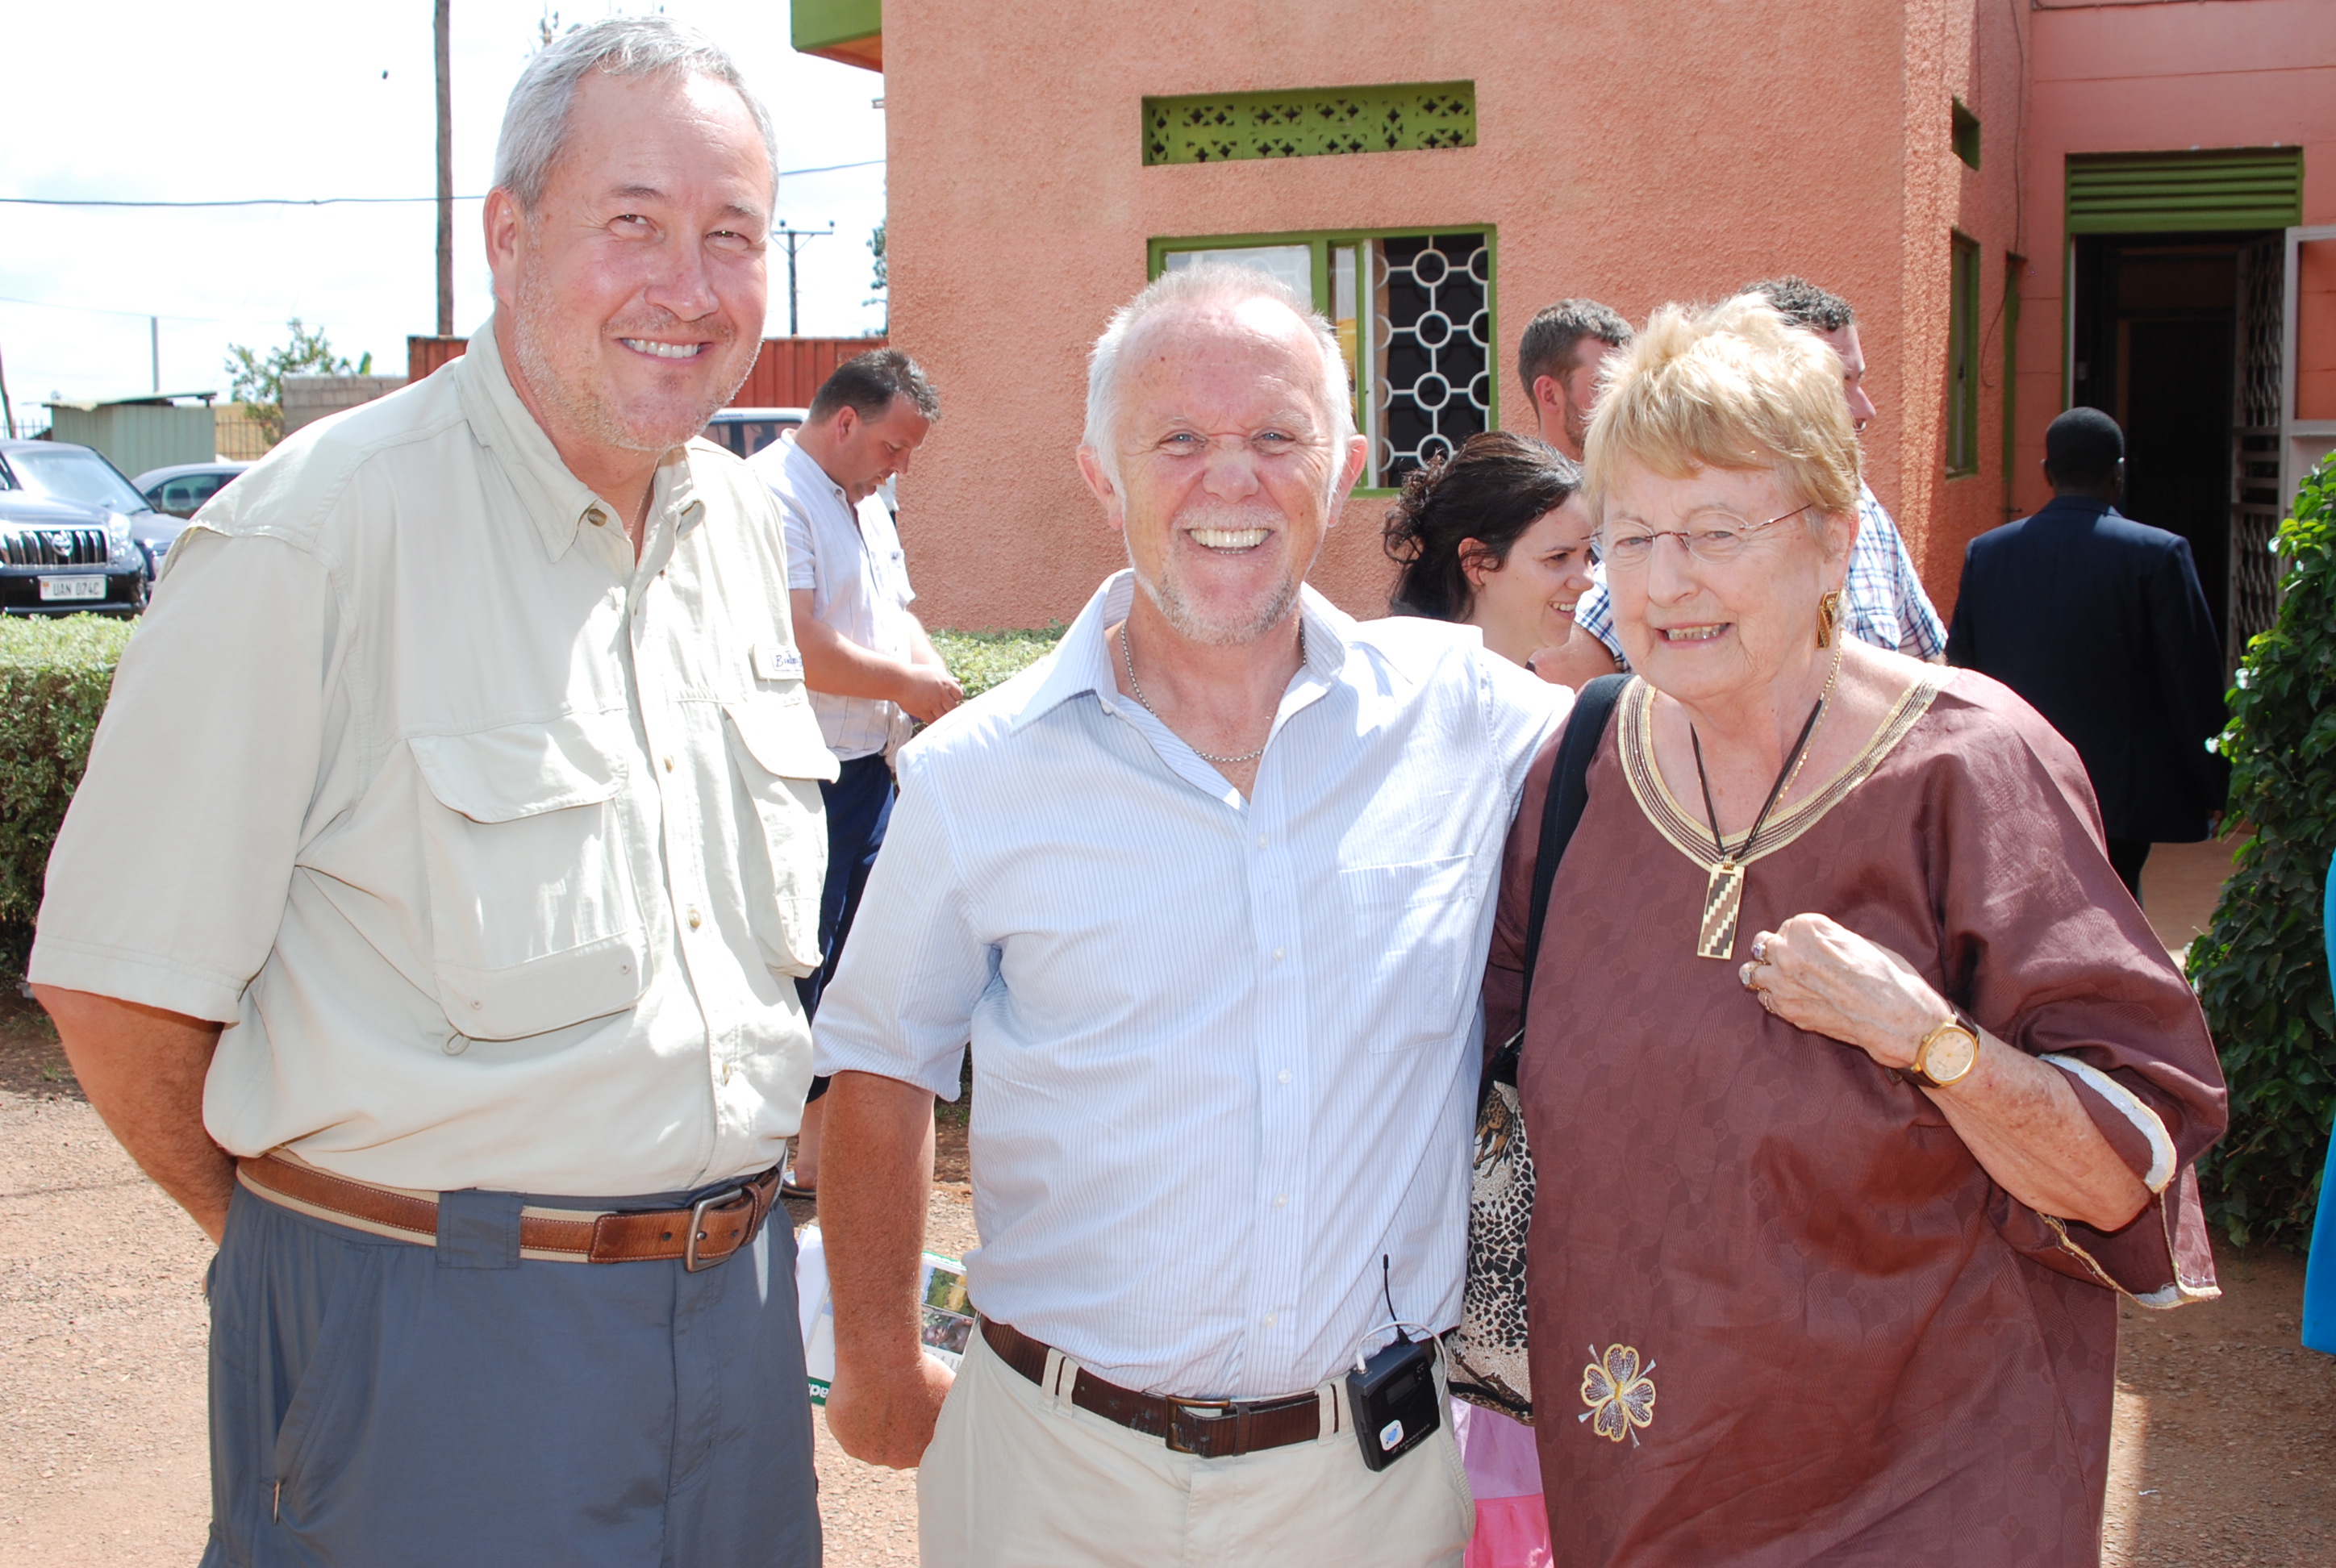 With Irish filmmaker, Eugene Murray, and Dr. Anne Merriman during filming of our respective documentaries about palliative care in Uganda during the Summer of 2010.